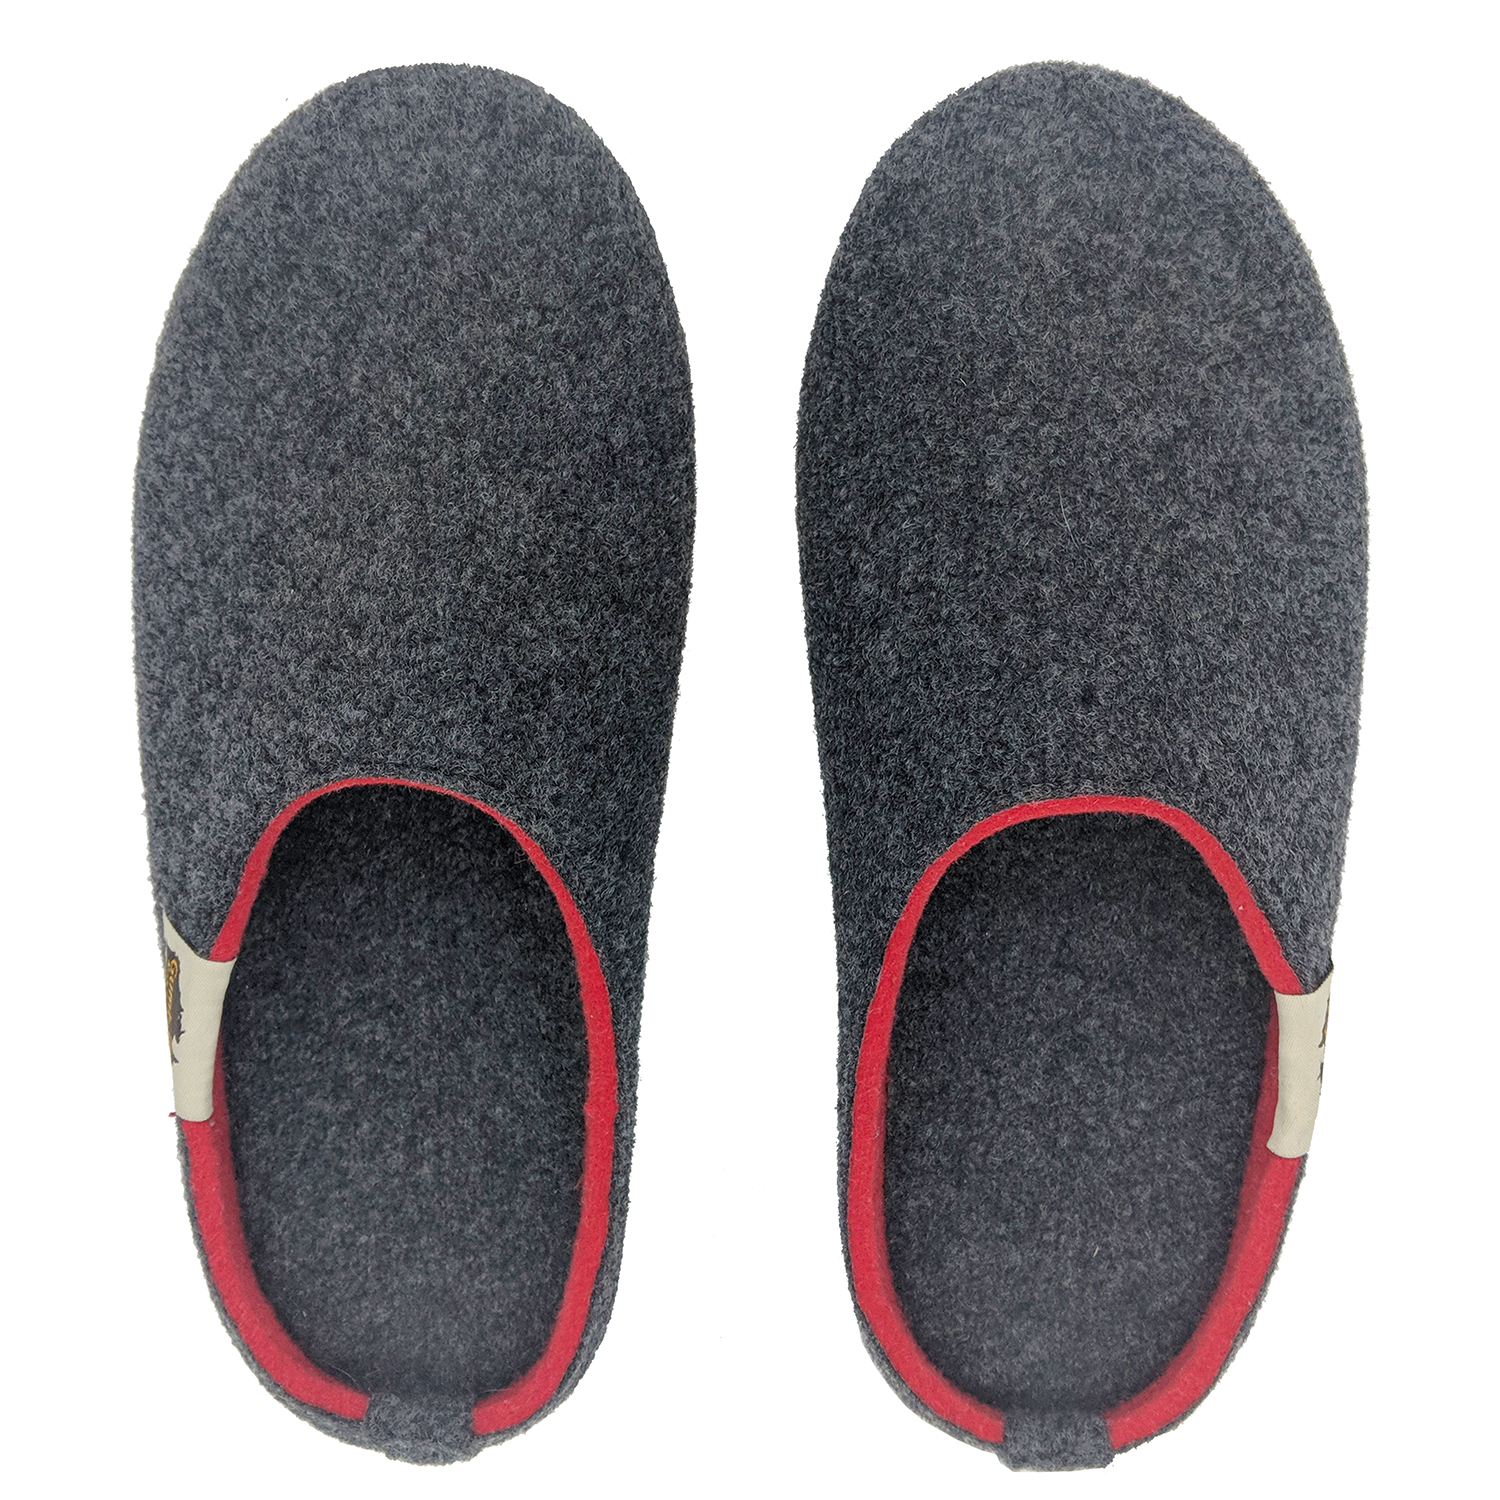 GUMBIES – Outback Slipper, CHARCOAL-RED 